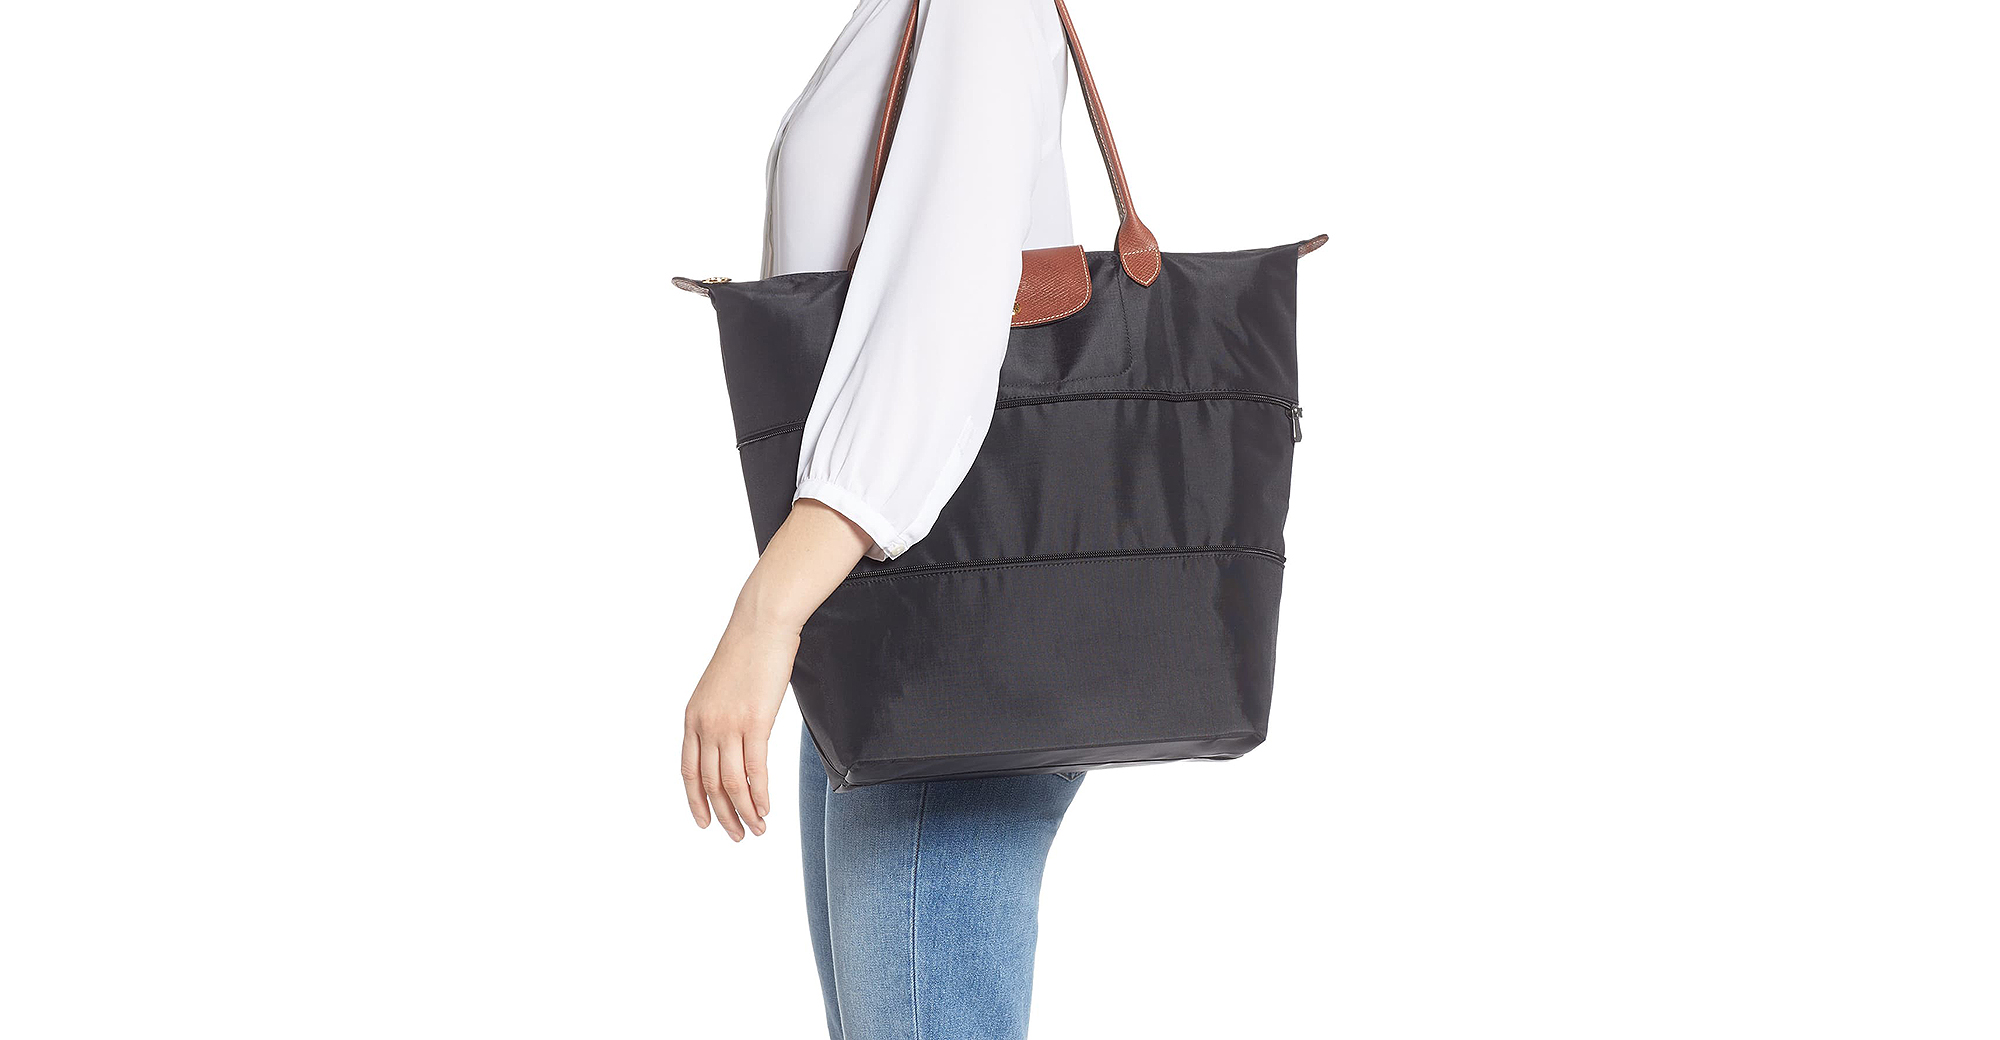 Longchamp Expandable Tote Is $75 Off in 